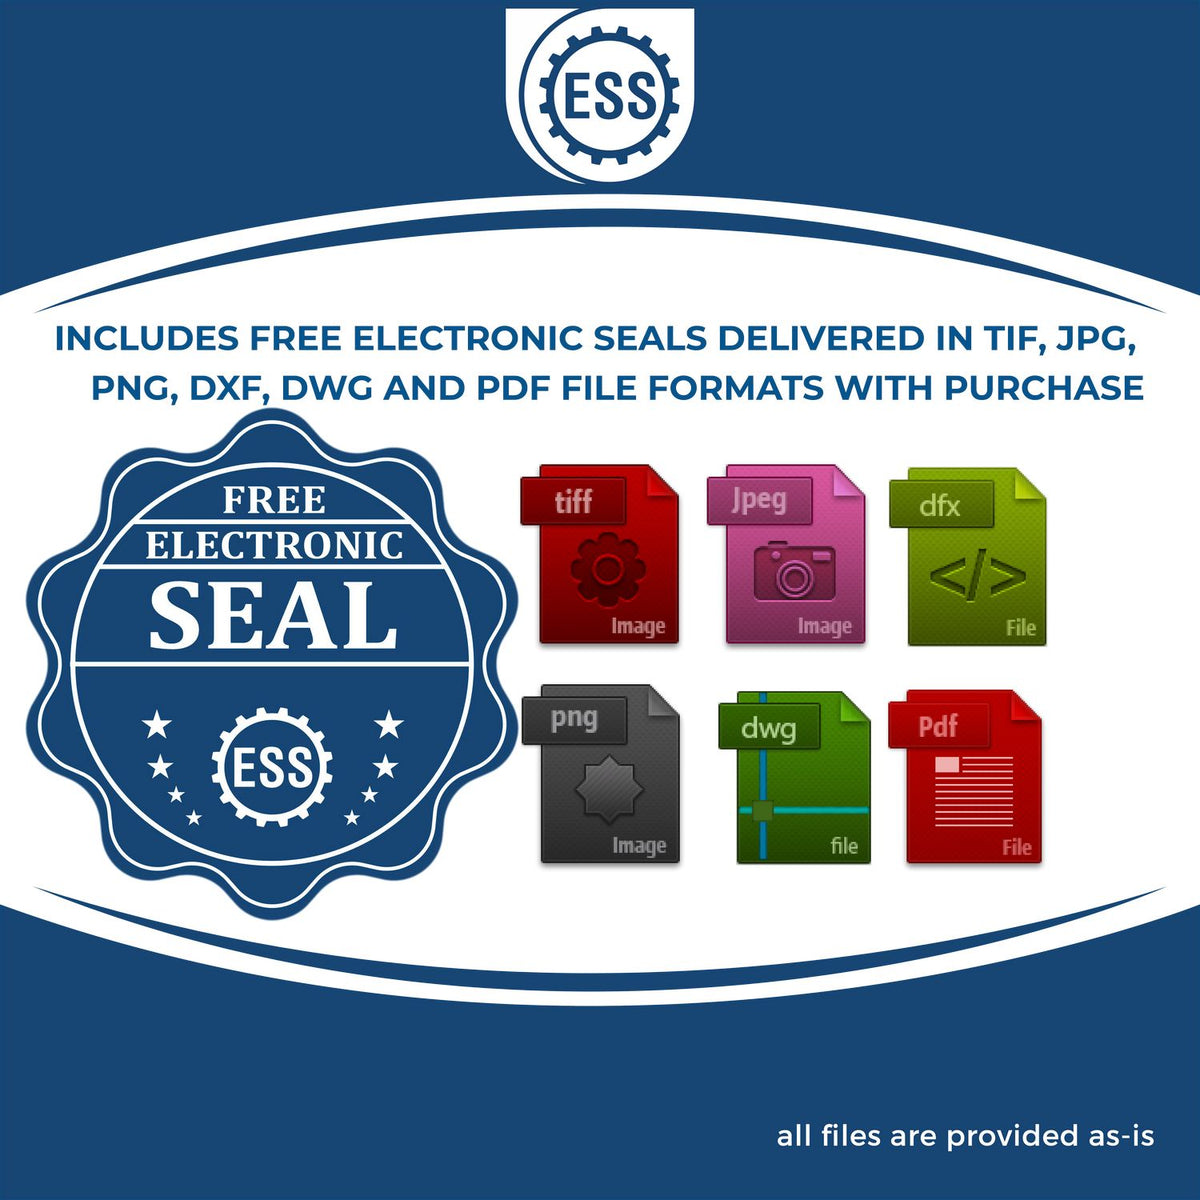 An infographic for the free electronic seal for the Soft Rhode Island Professional Engineer Seal illustrating the different file type icons such as DXF, DWG, TIF, JPG and PNG.